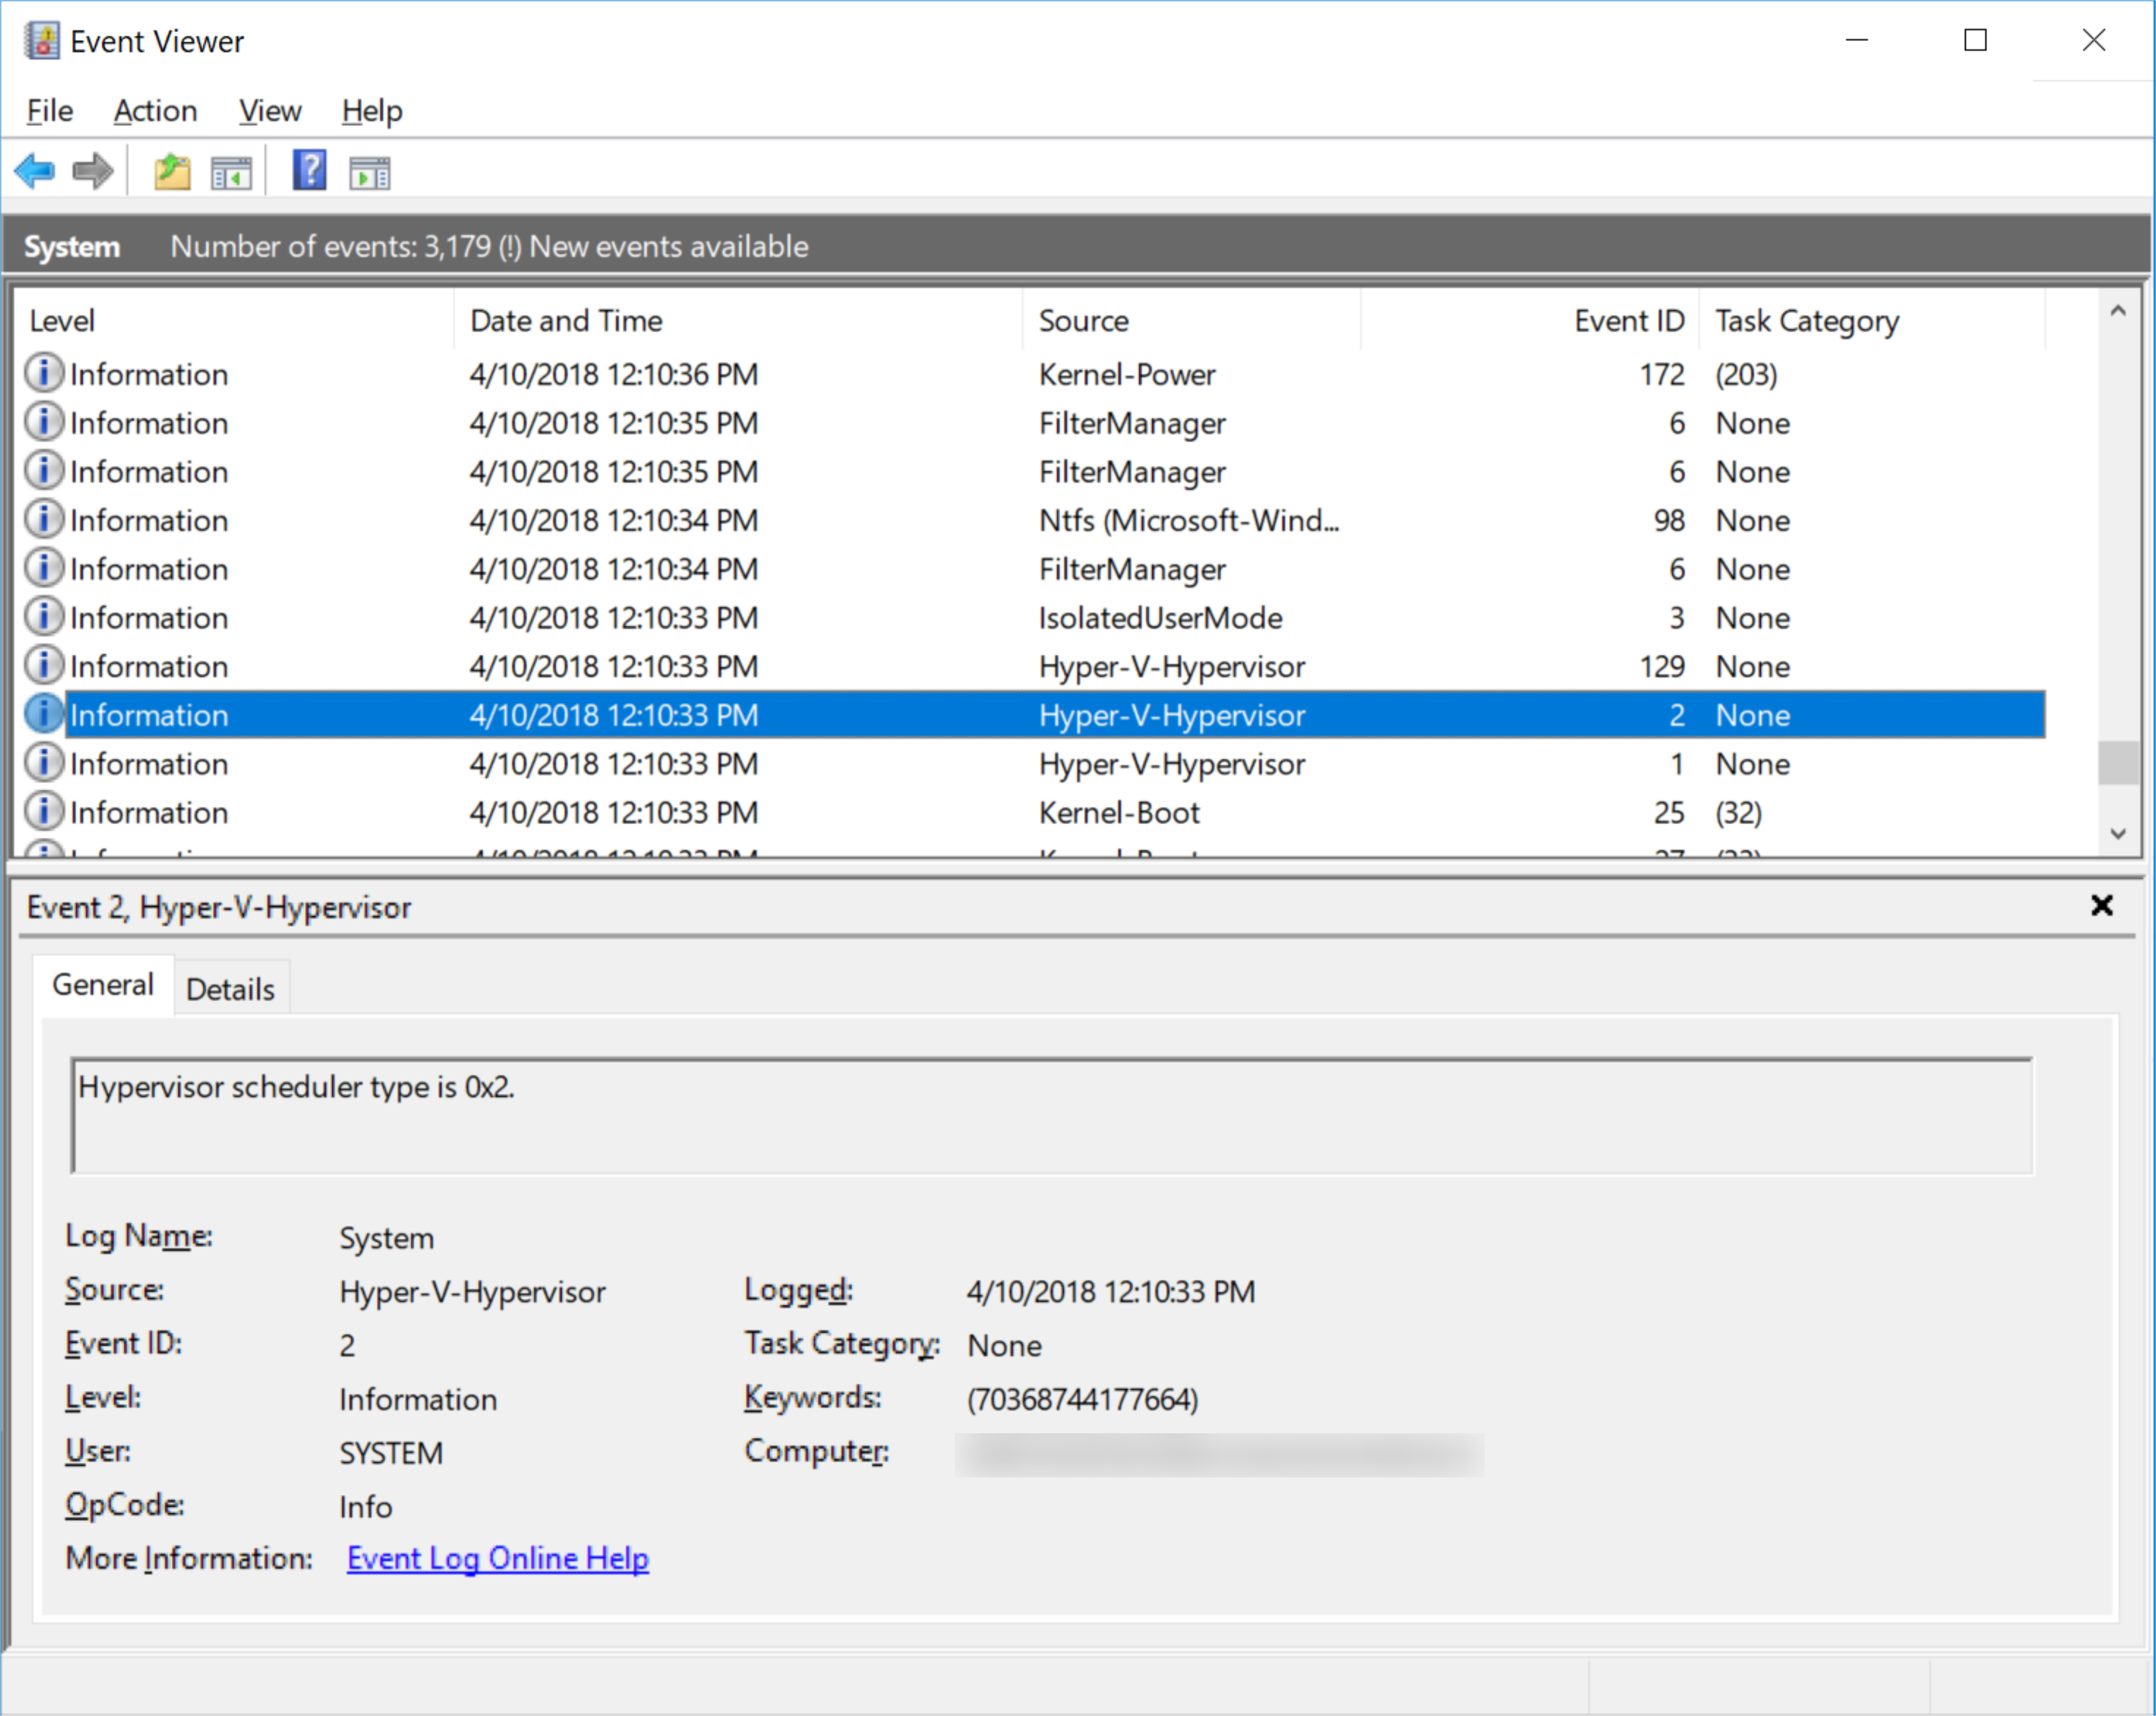 Screen shot showing Event Viewer displaying hypervisor launch event ID 2